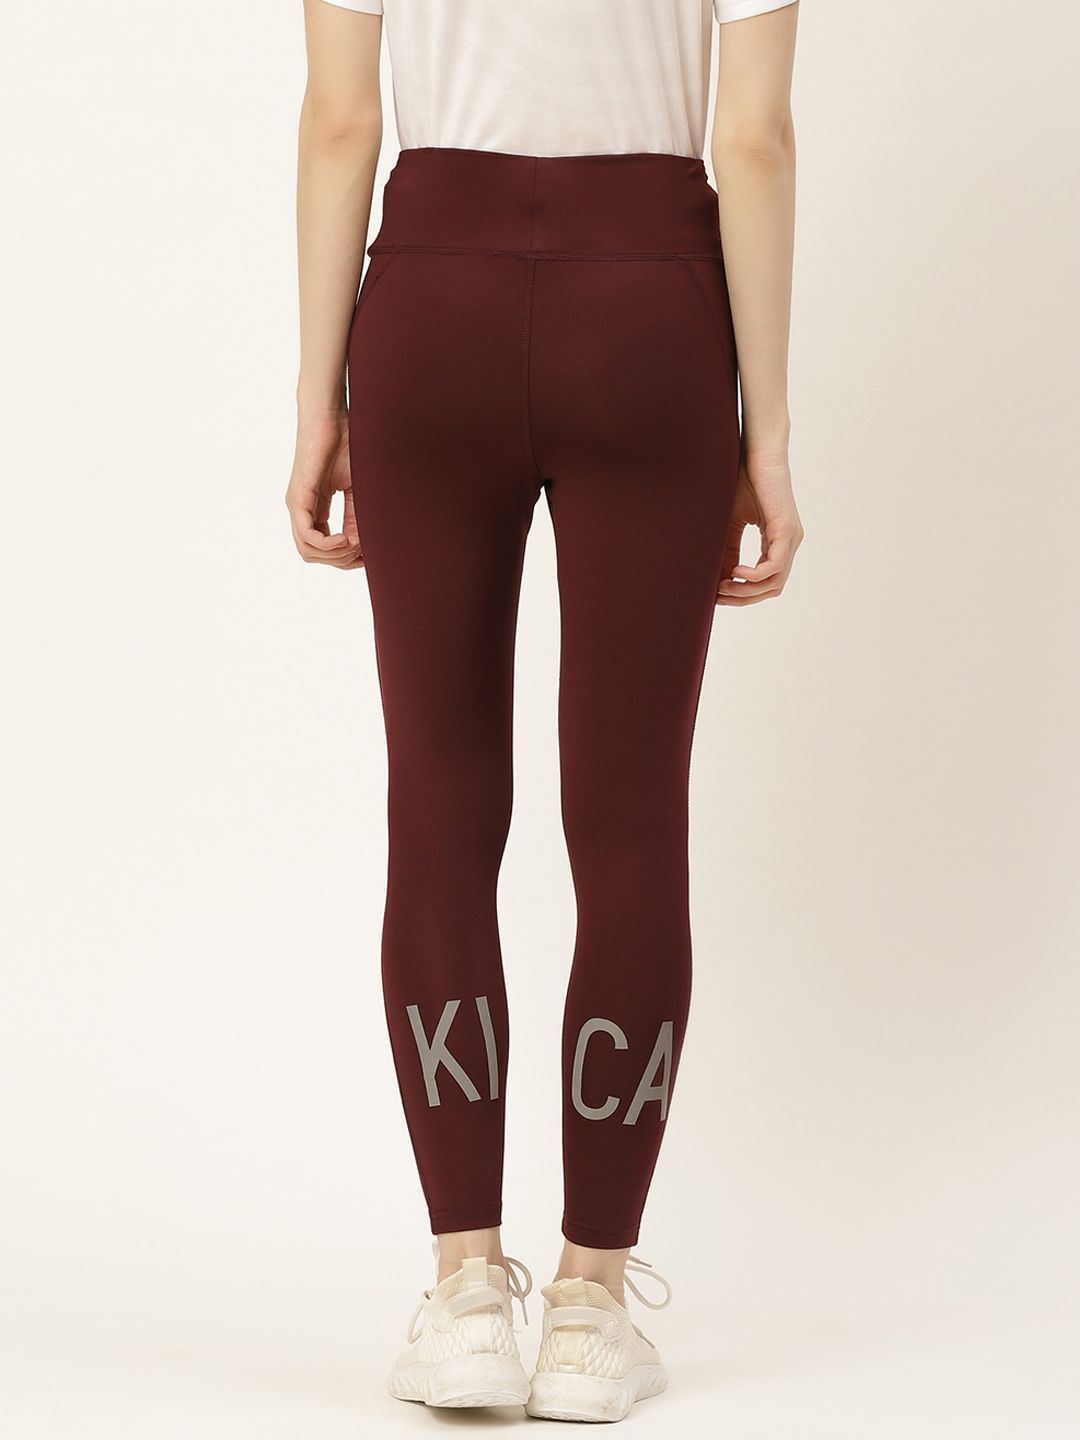 KICA Women Burgundy High Waisted Leggings With Reflective Letters At Ankles Price in India